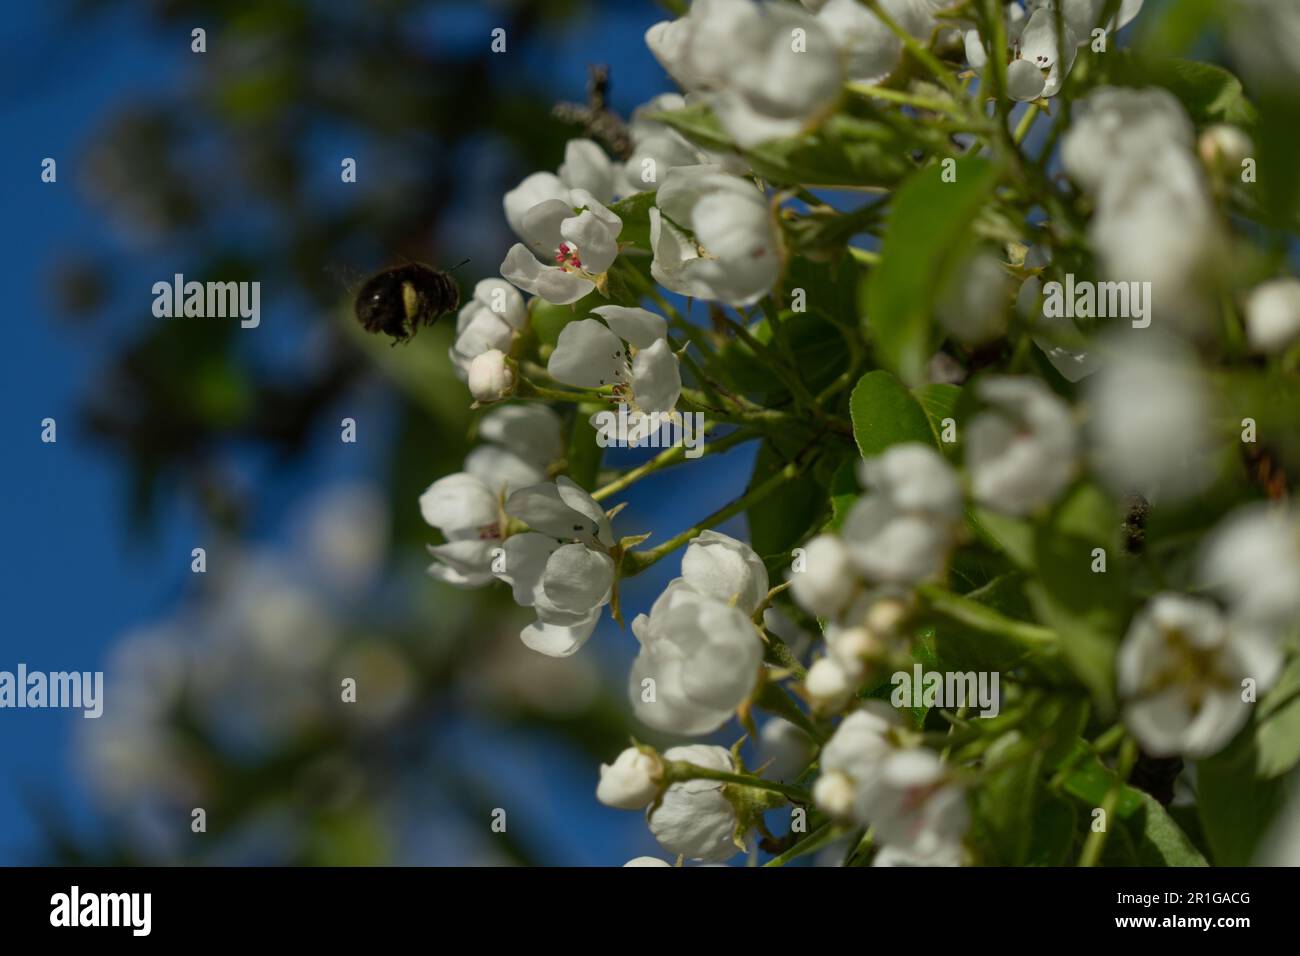 Blooming pear tree and bumble bee Stock Photo